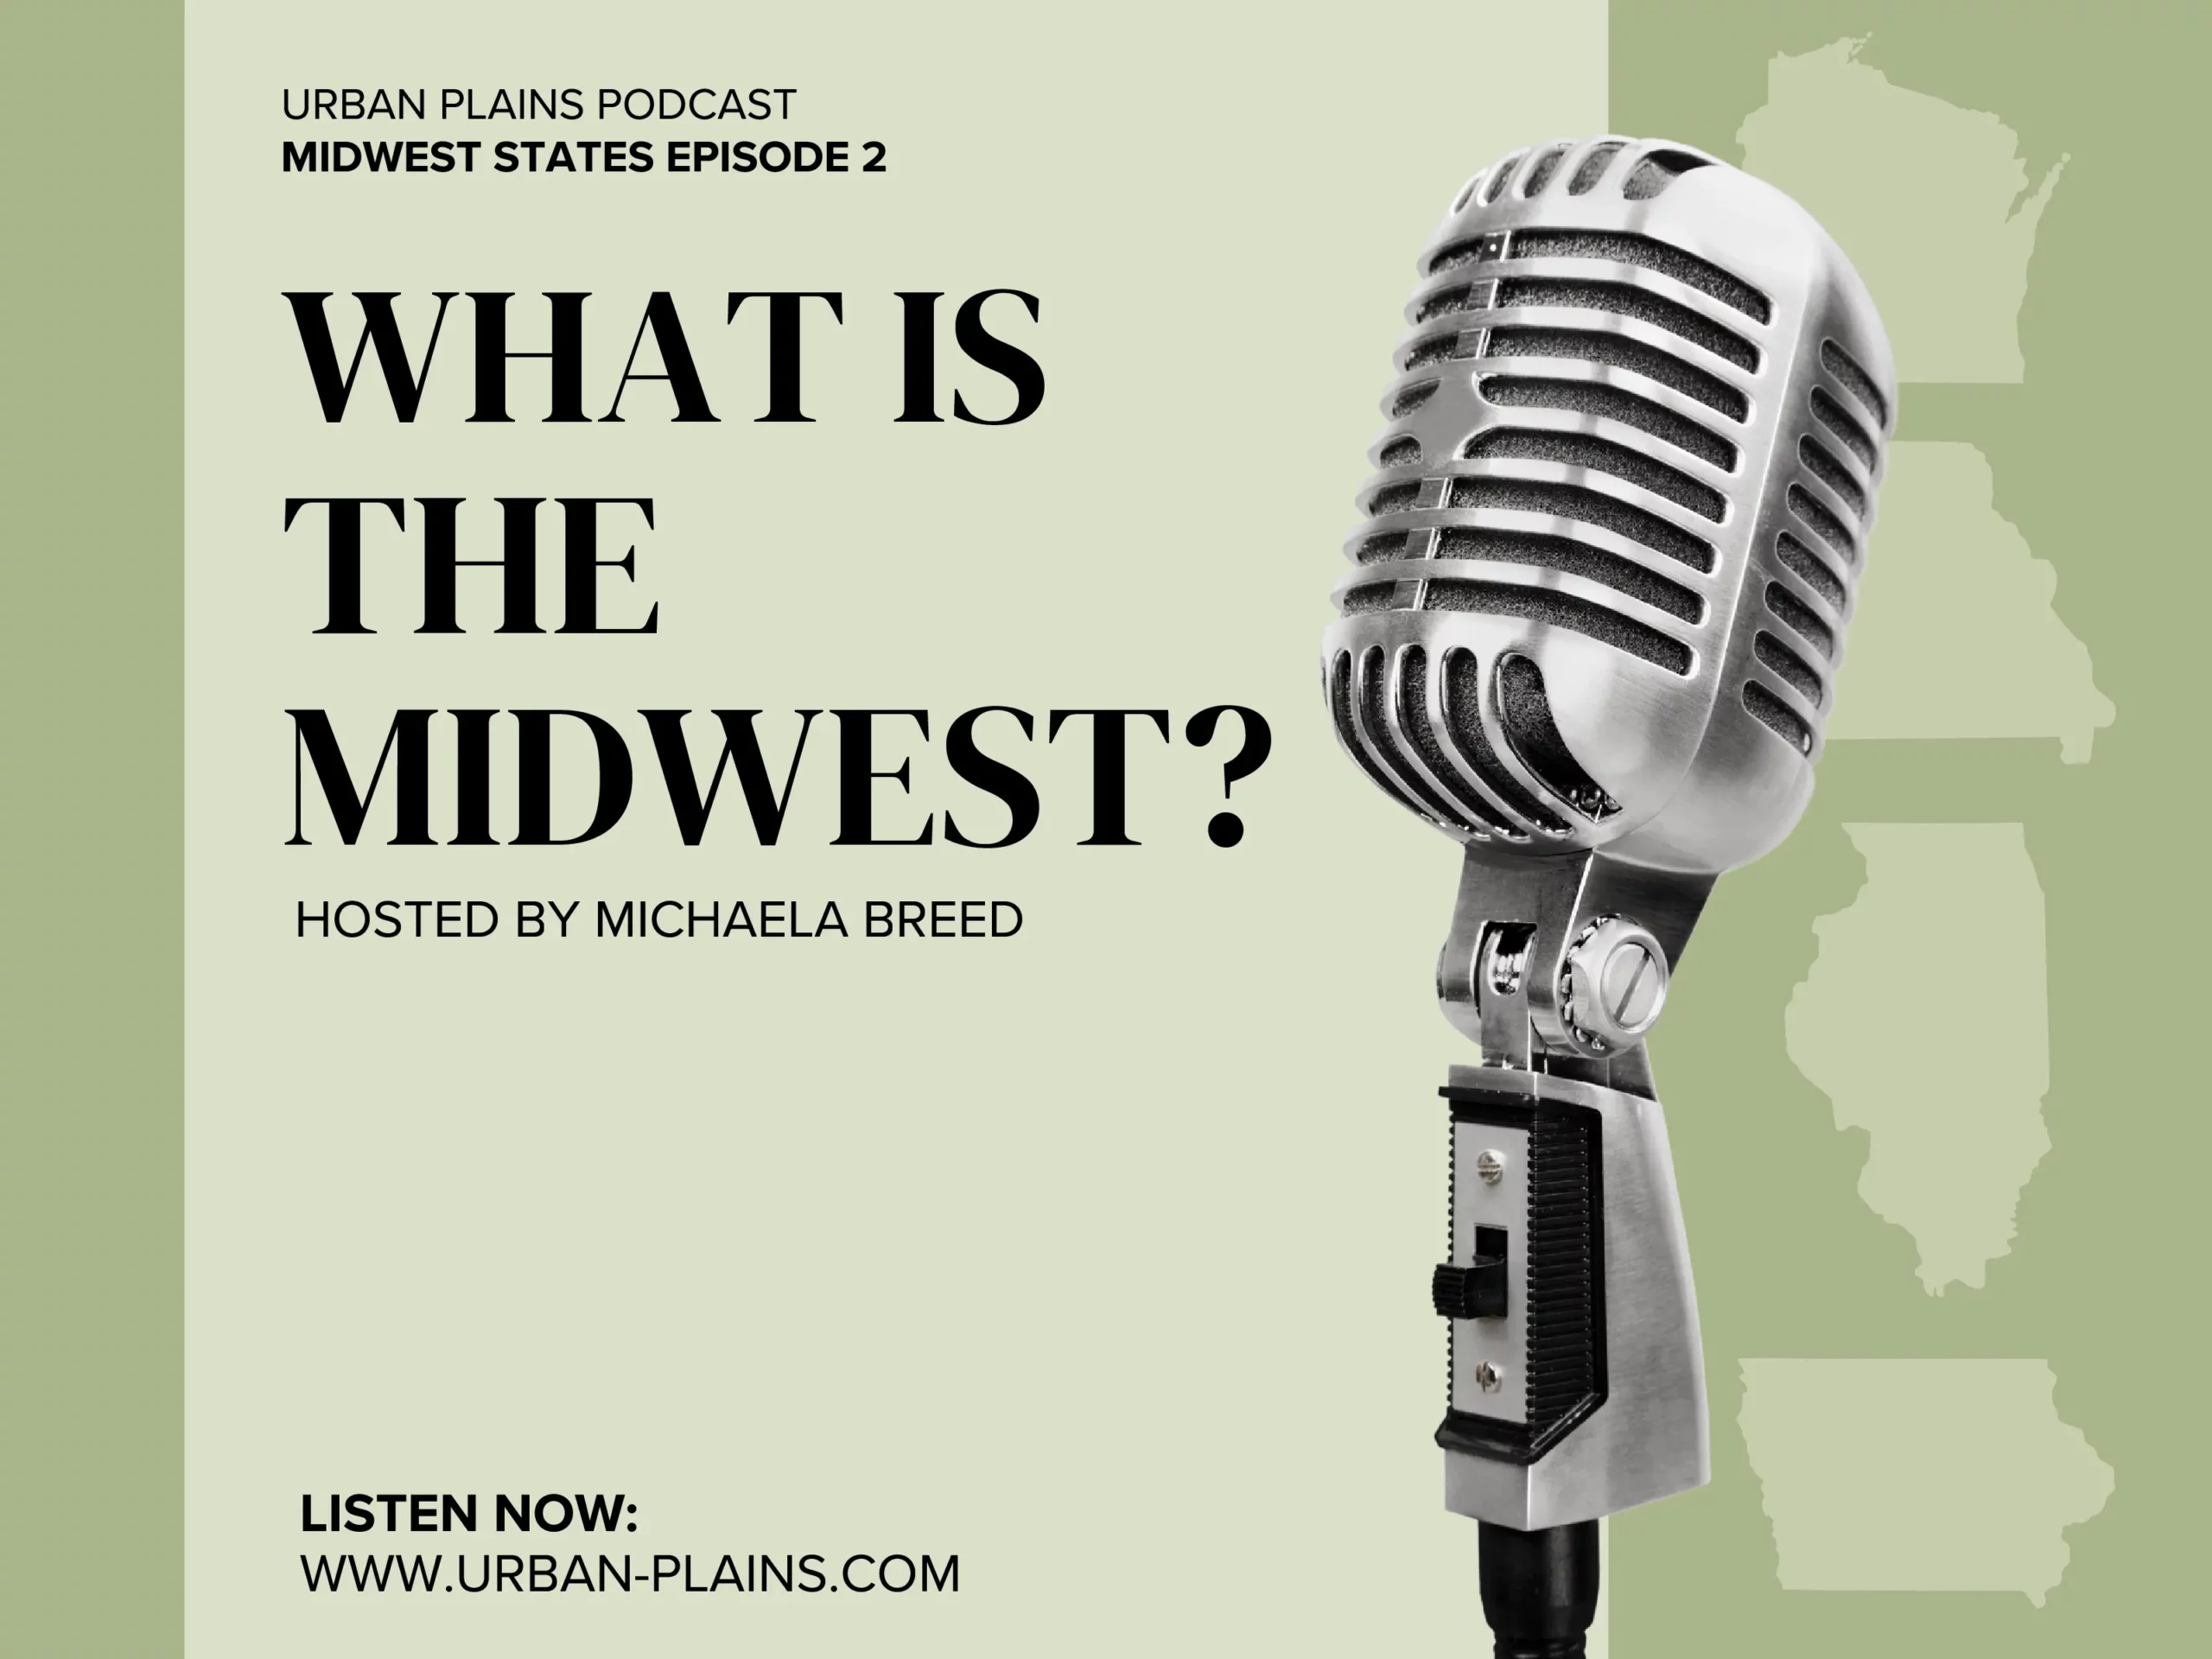 What is the Midwest?